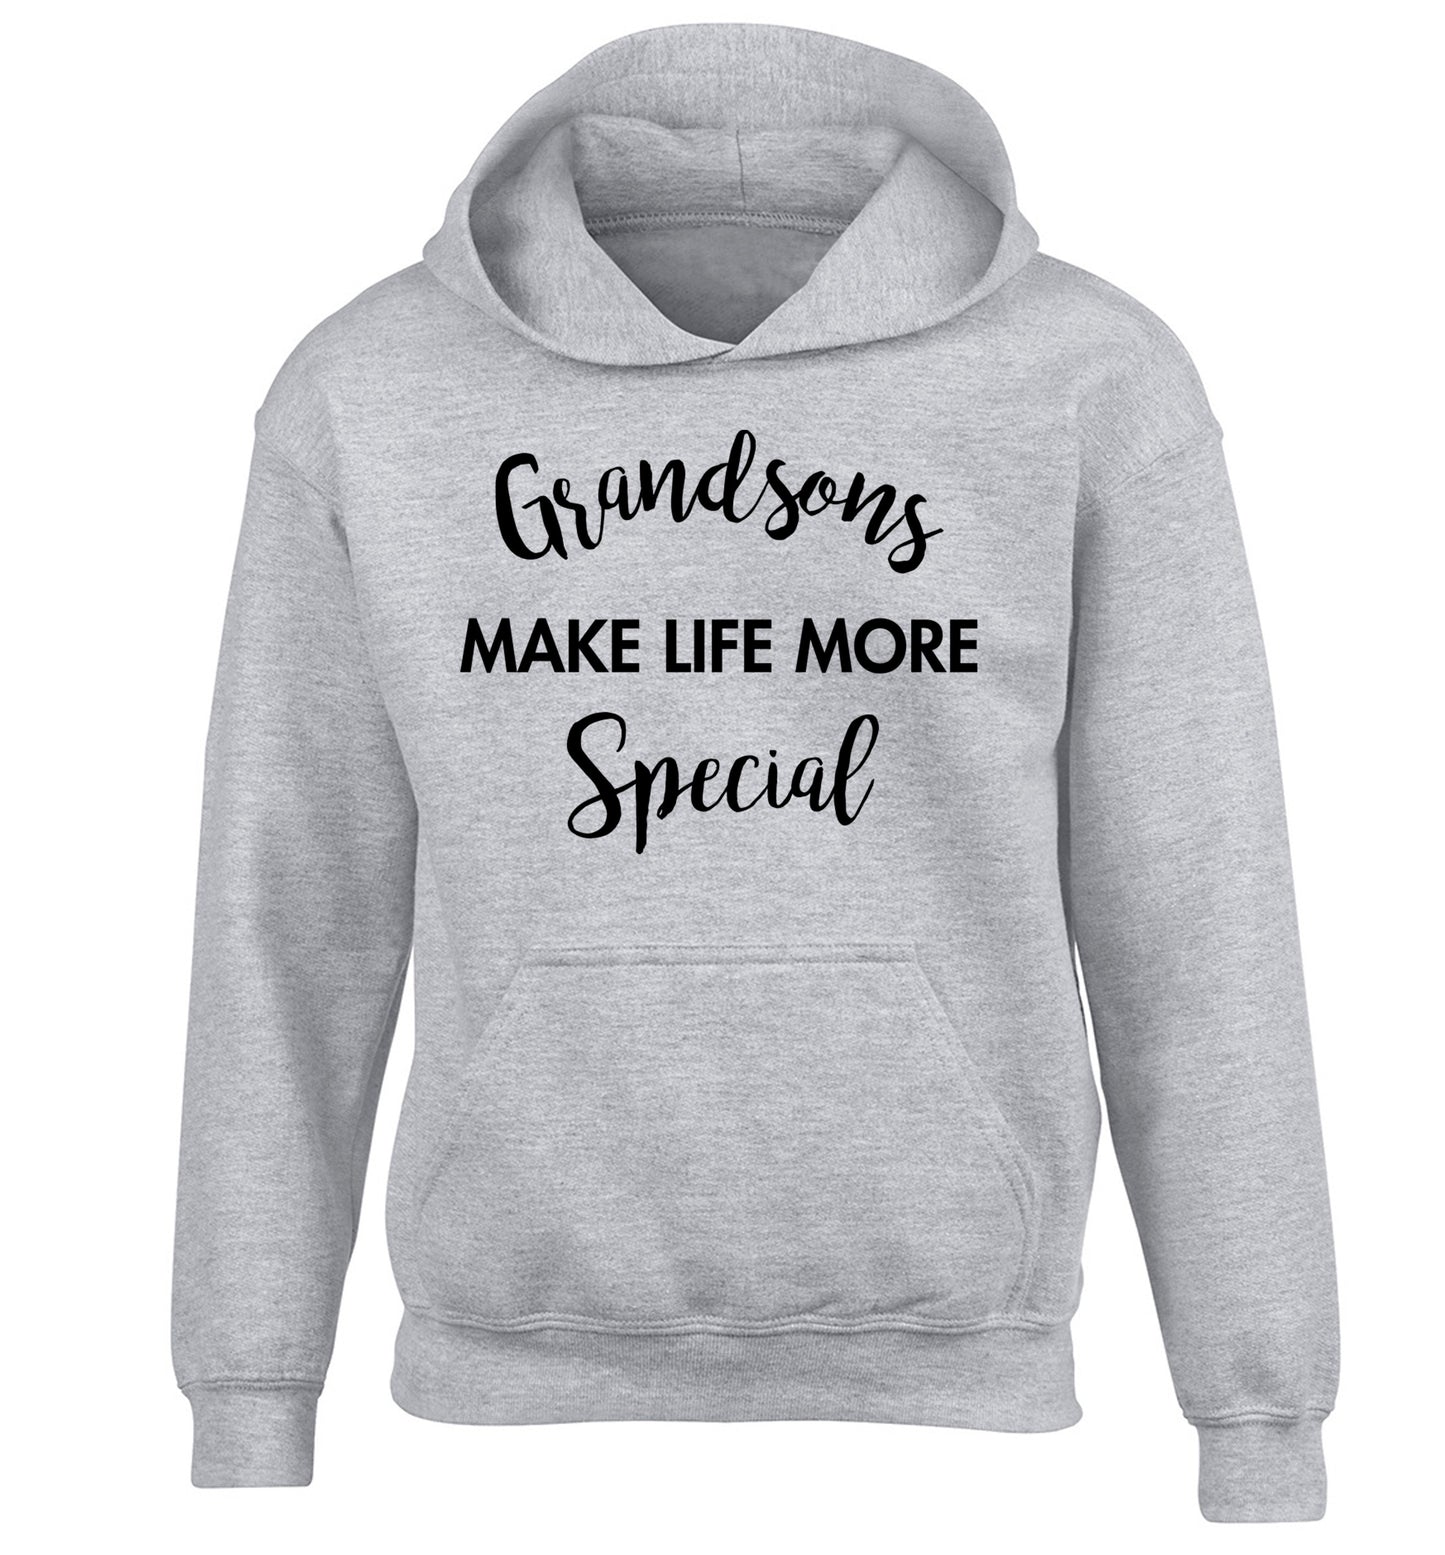 Grandsons make life more special children's grey hoodie 12-14 Years